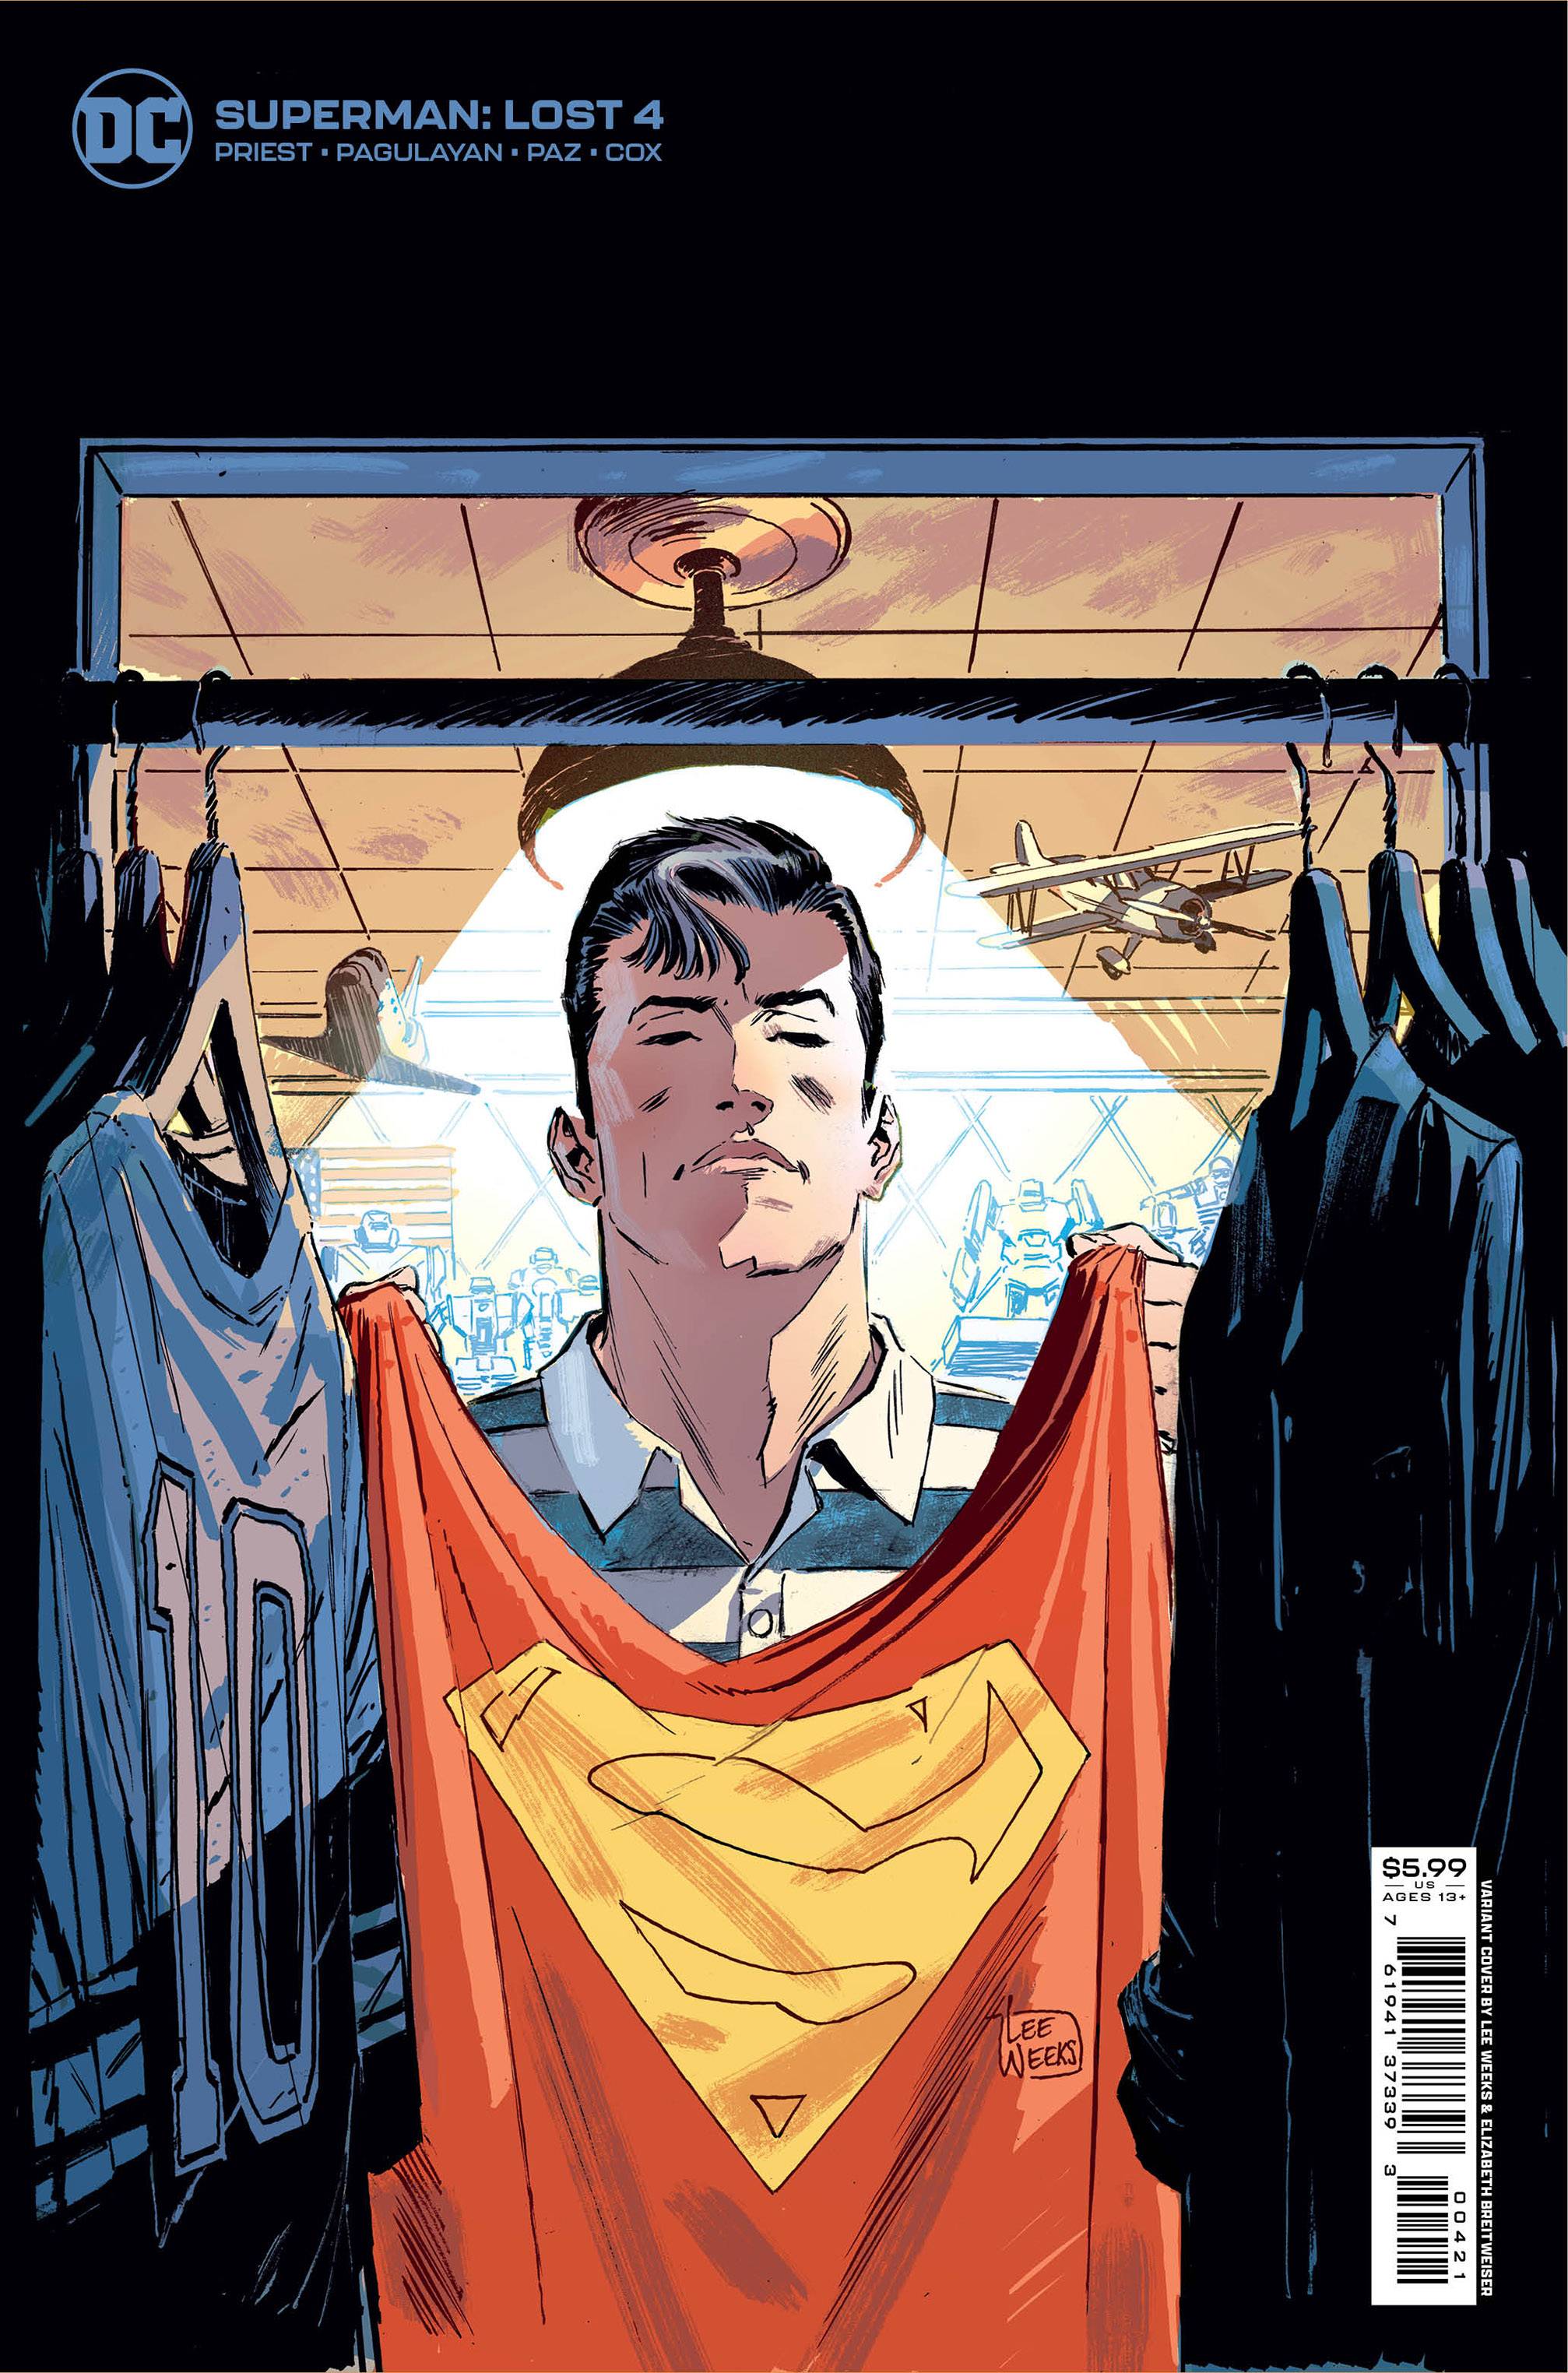 Superman lost issue 4 release date